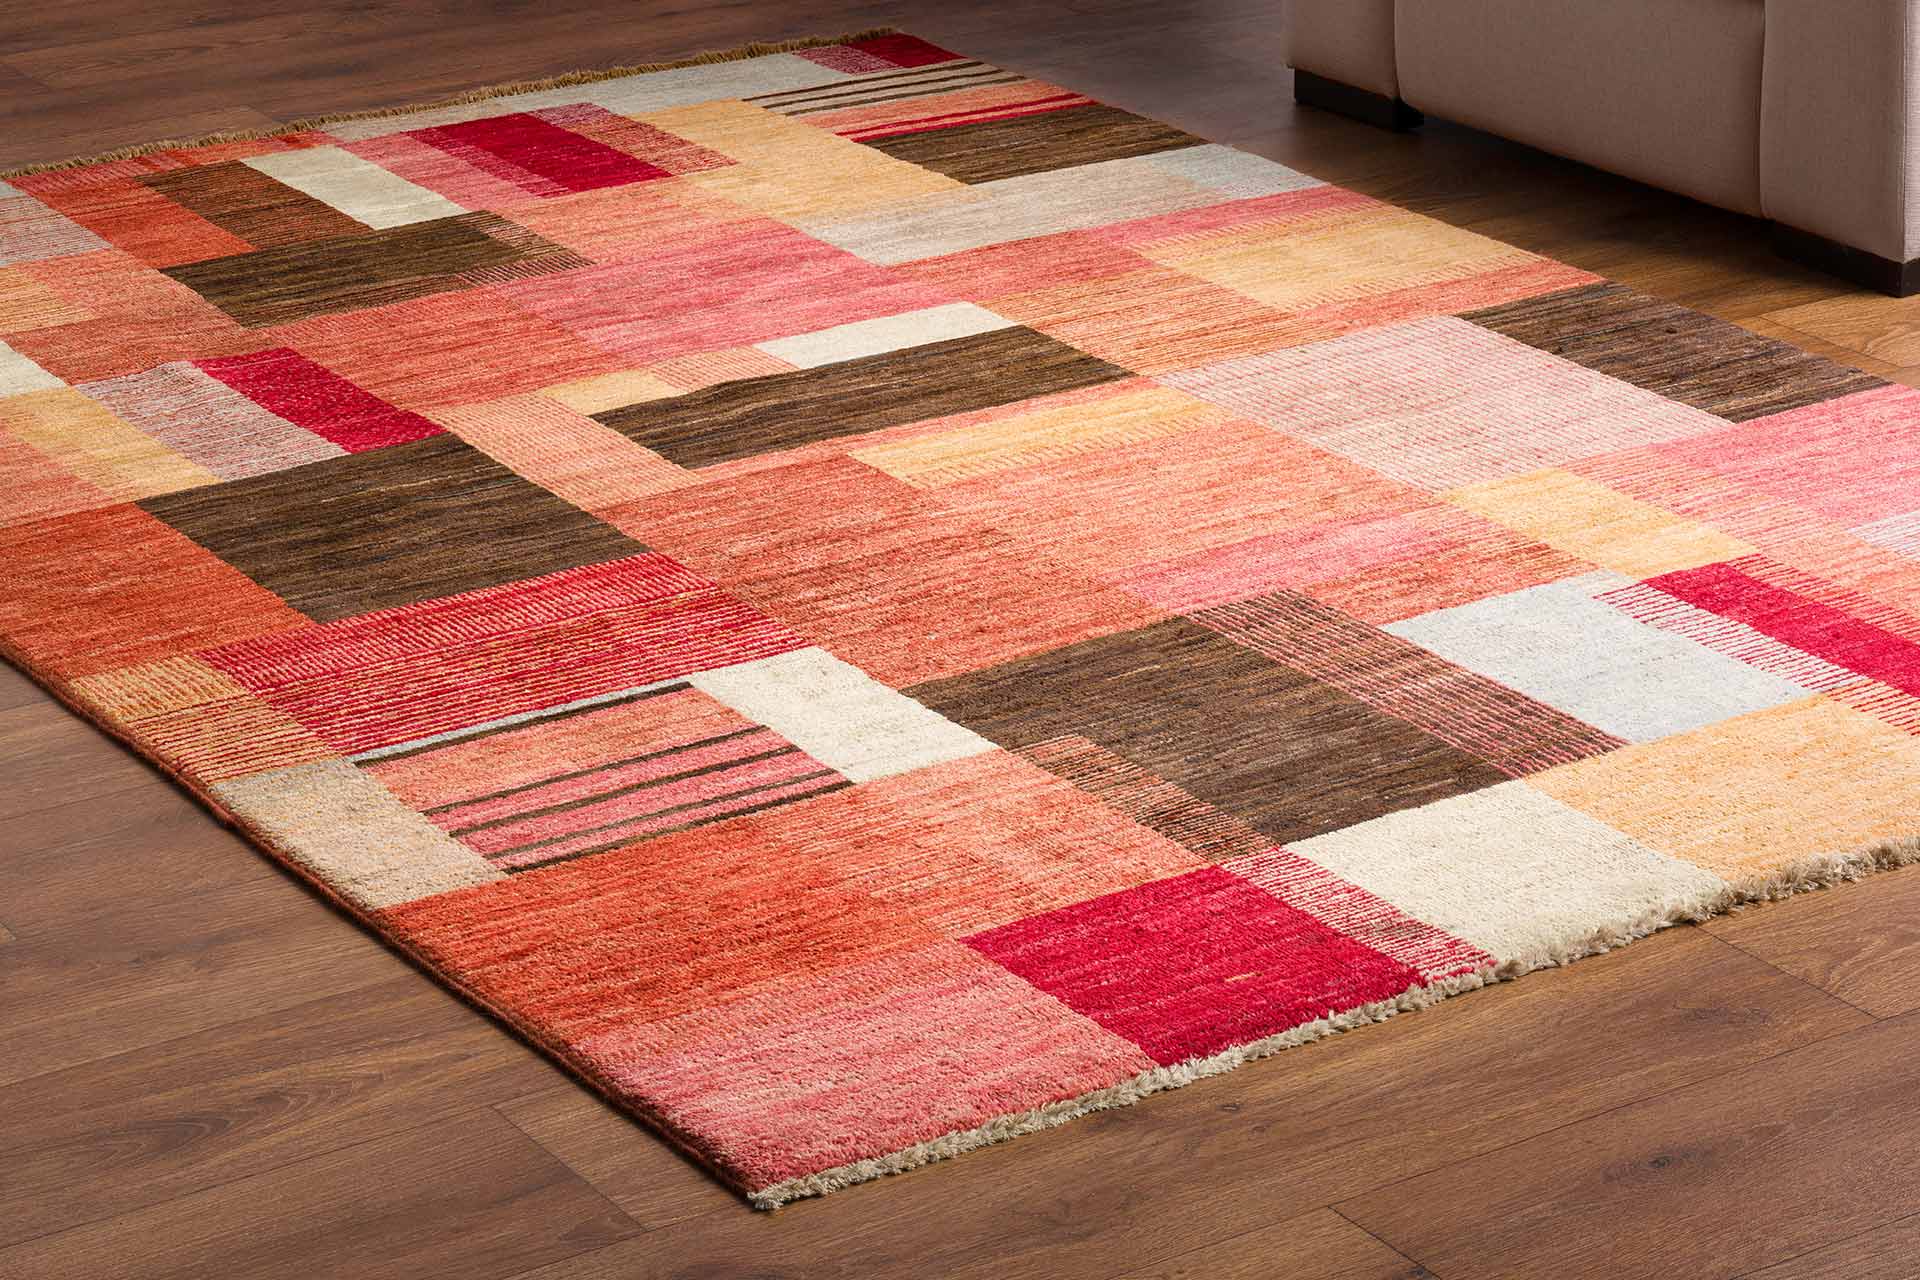 Rugs For Sale in Manchester | Buy Rugs Online | Lifestyle Carpets